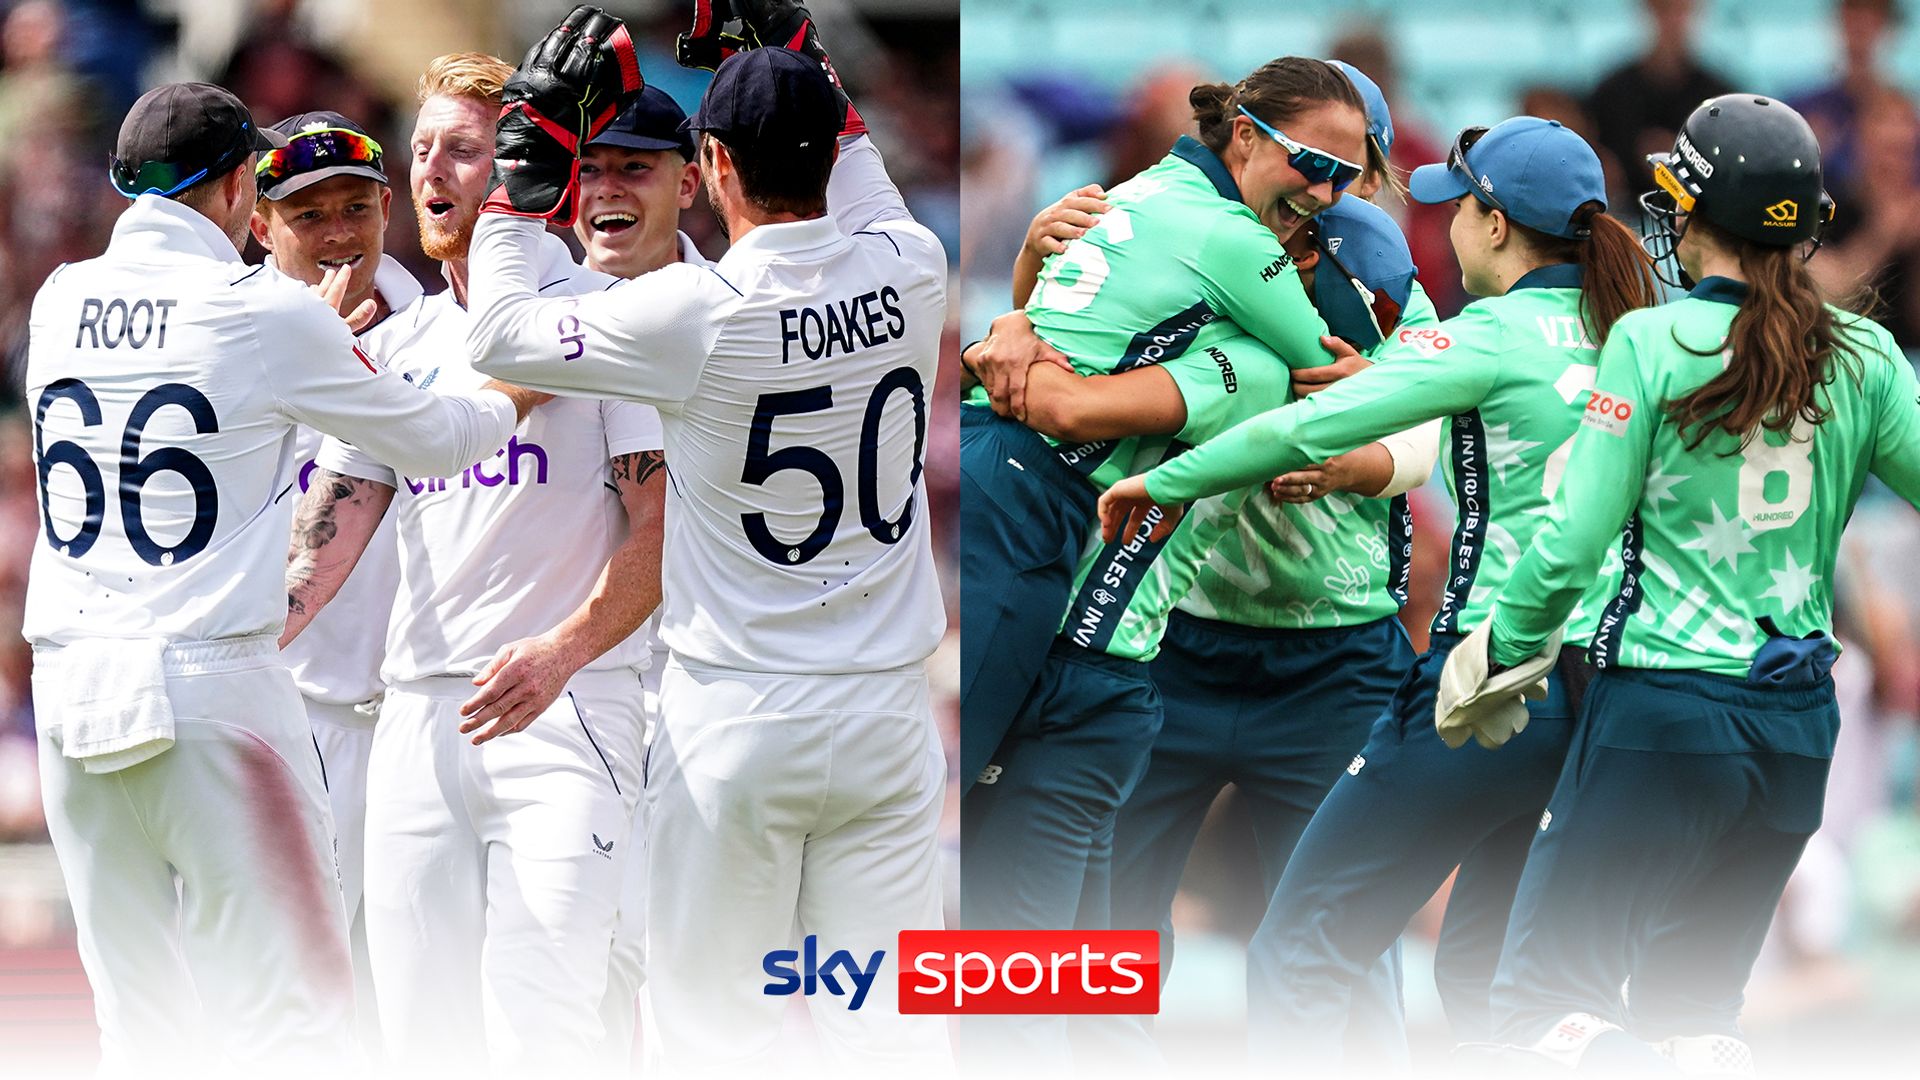 Sky Sports and ECB extend partnership through to 2028